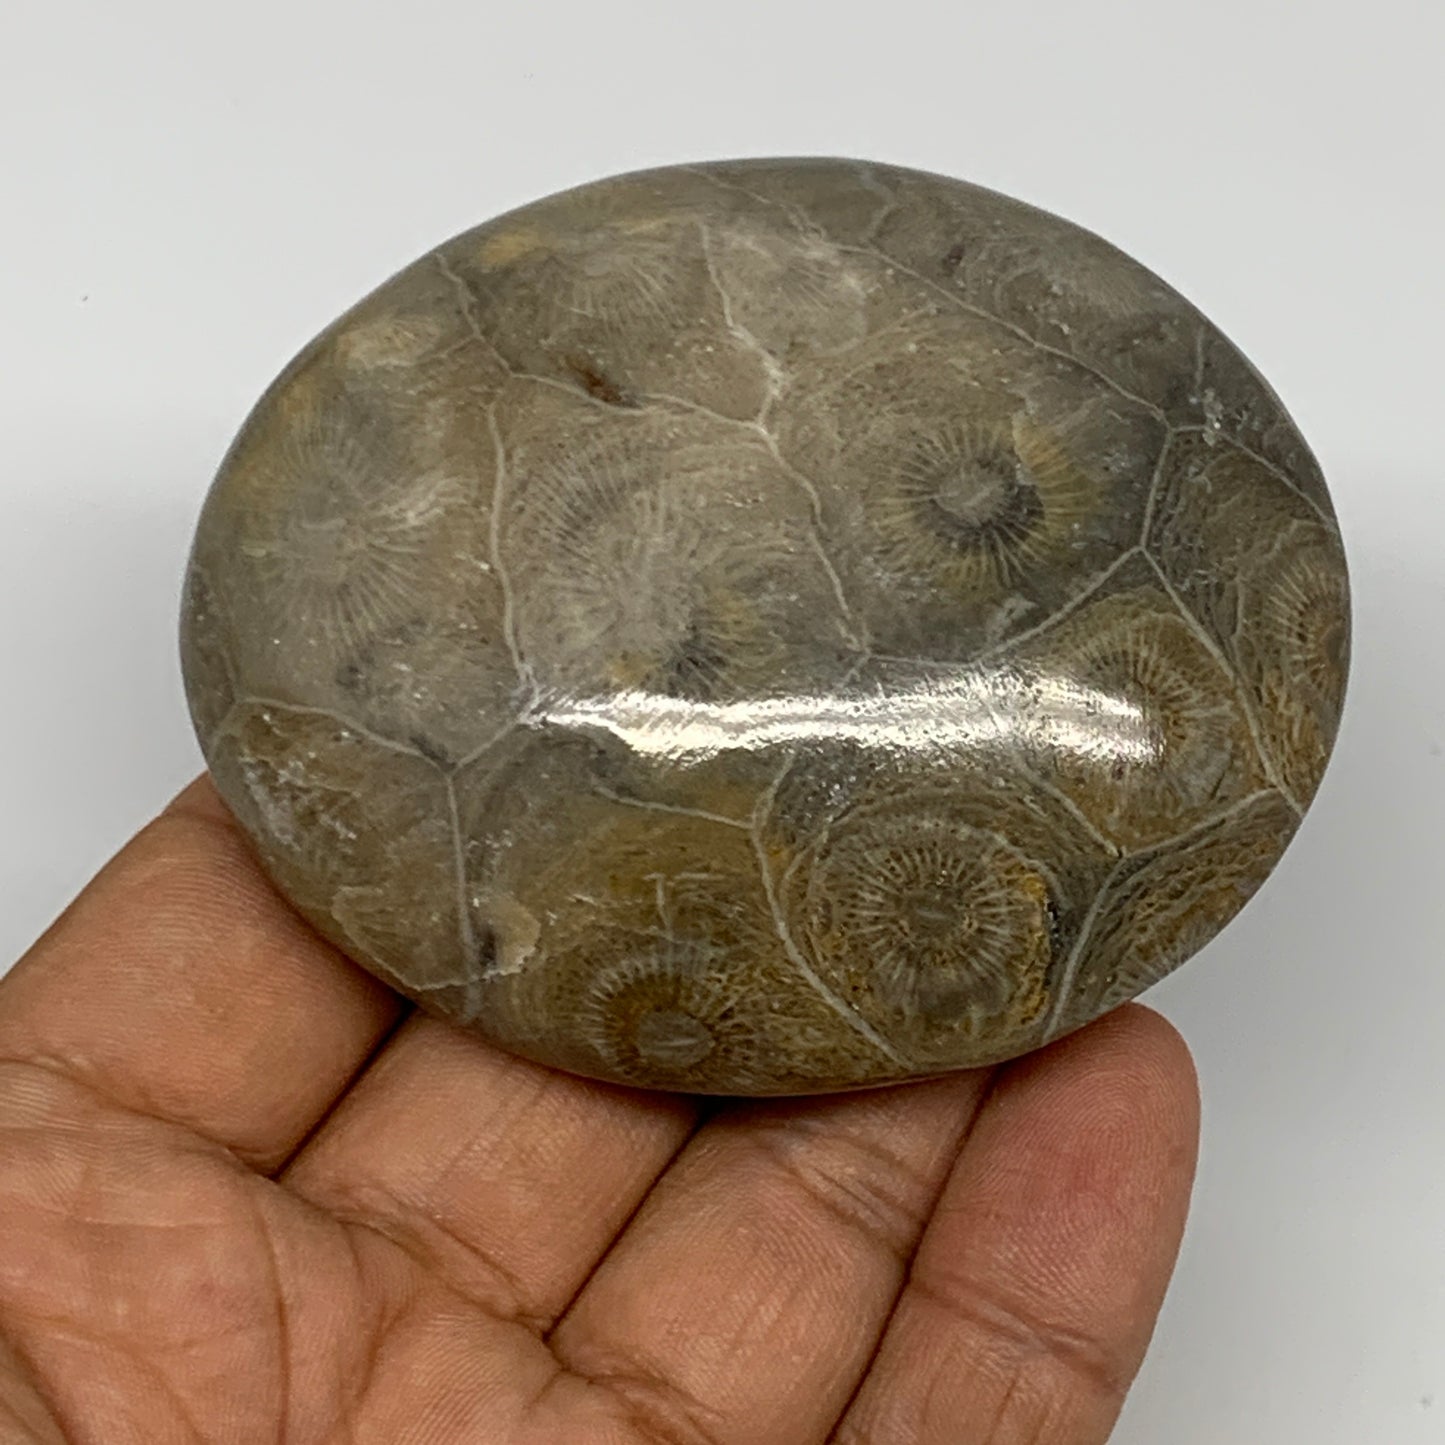 145.6g,2.8"x2.4"x 1", Coral Fossils Palm-Stone Polished from Morocco, B20347